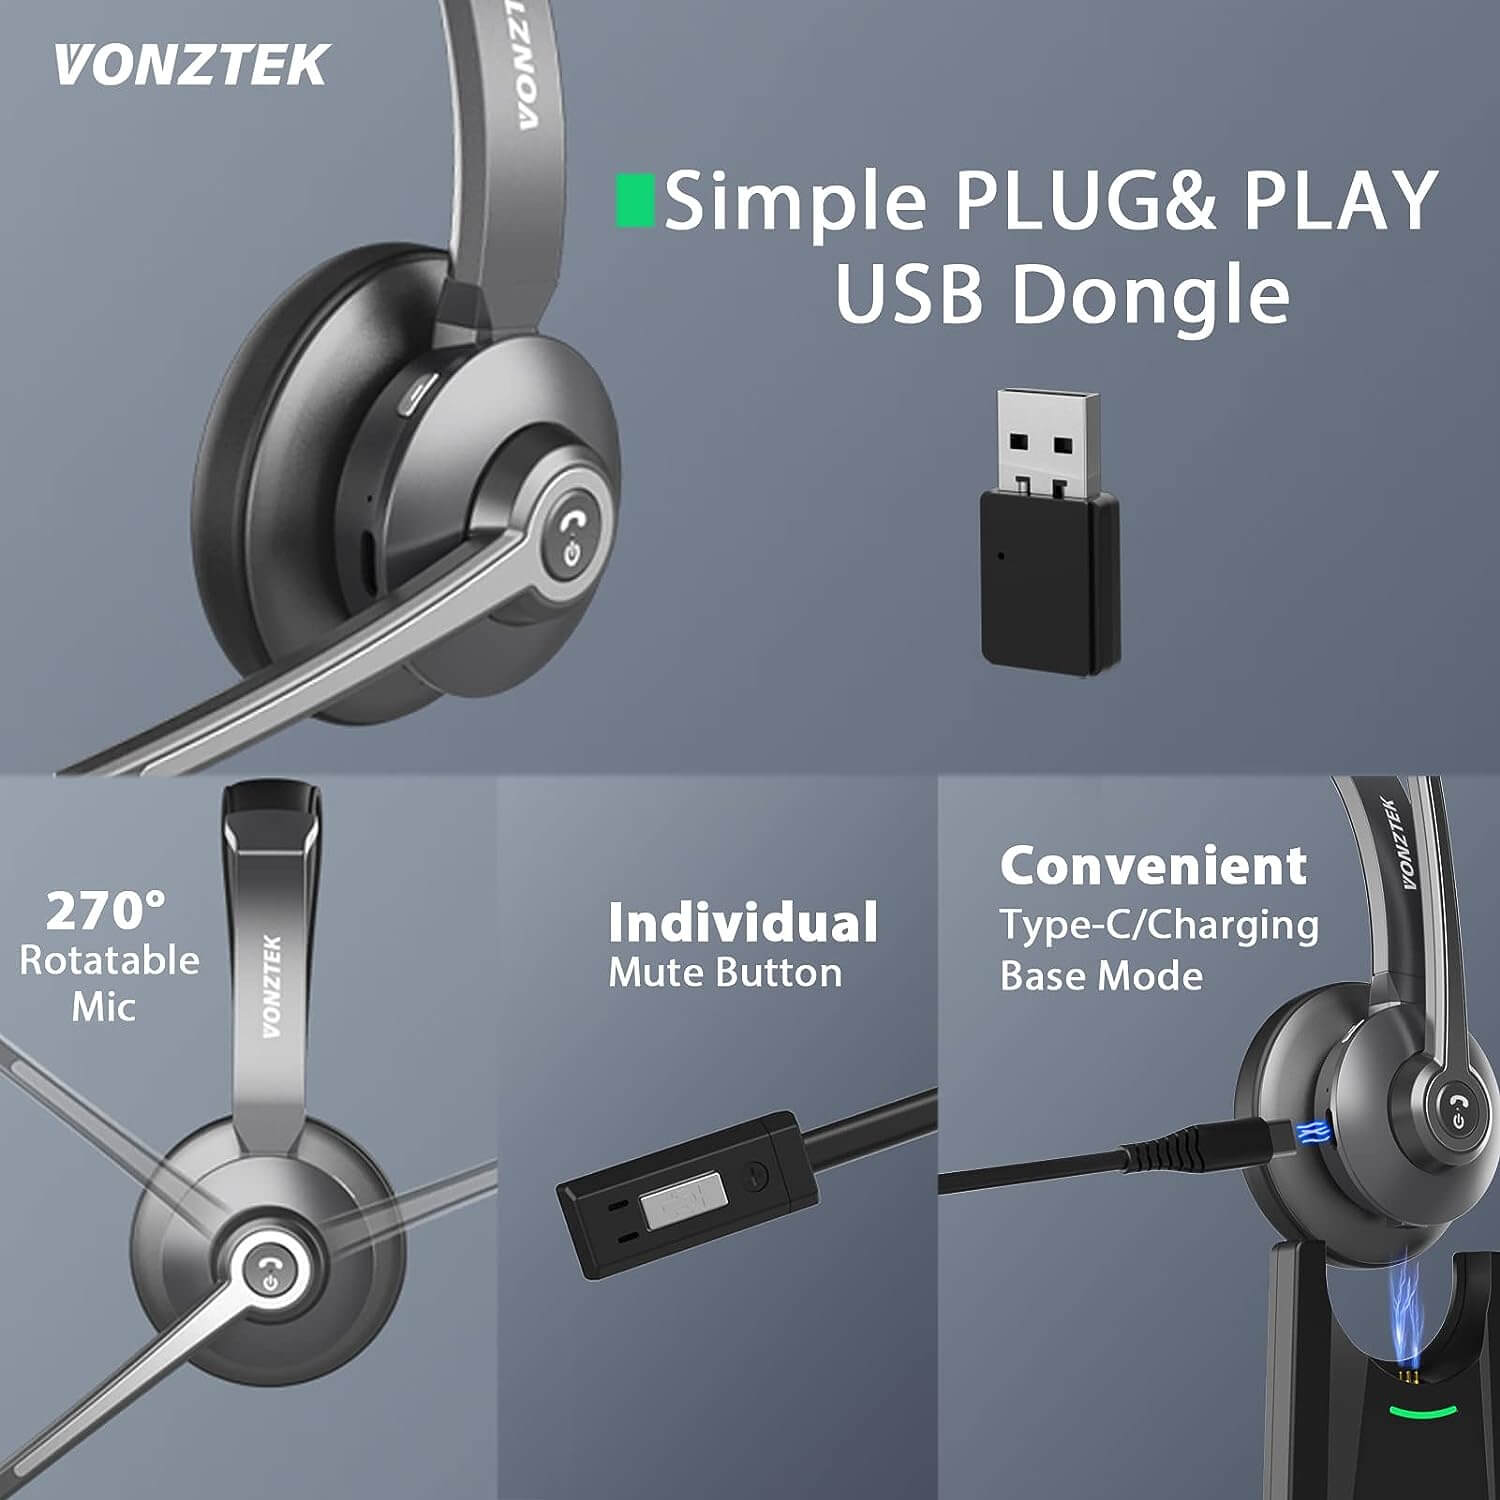 Simple plug & play USB dongle,270° rotatable mic,Individual mute button,Convenient type-C/Charging base mode.